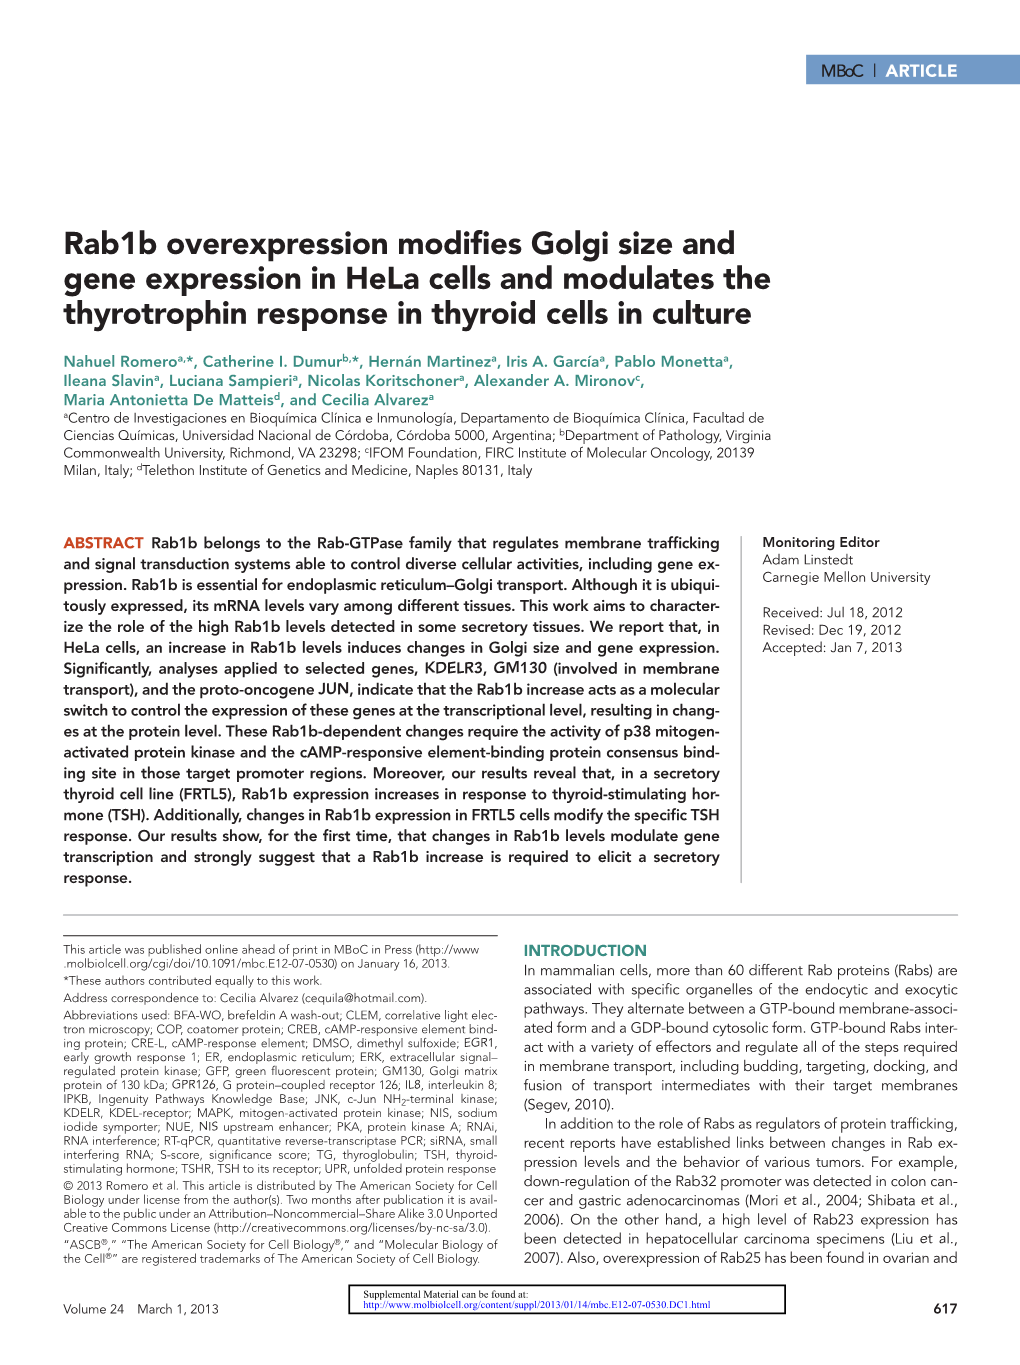 Rab1b Overexpression Modifies Golgi Size and Gene Expression in Hela Cells and Modulates the Thyrotrophin Response in Thyroid Cells in Culture